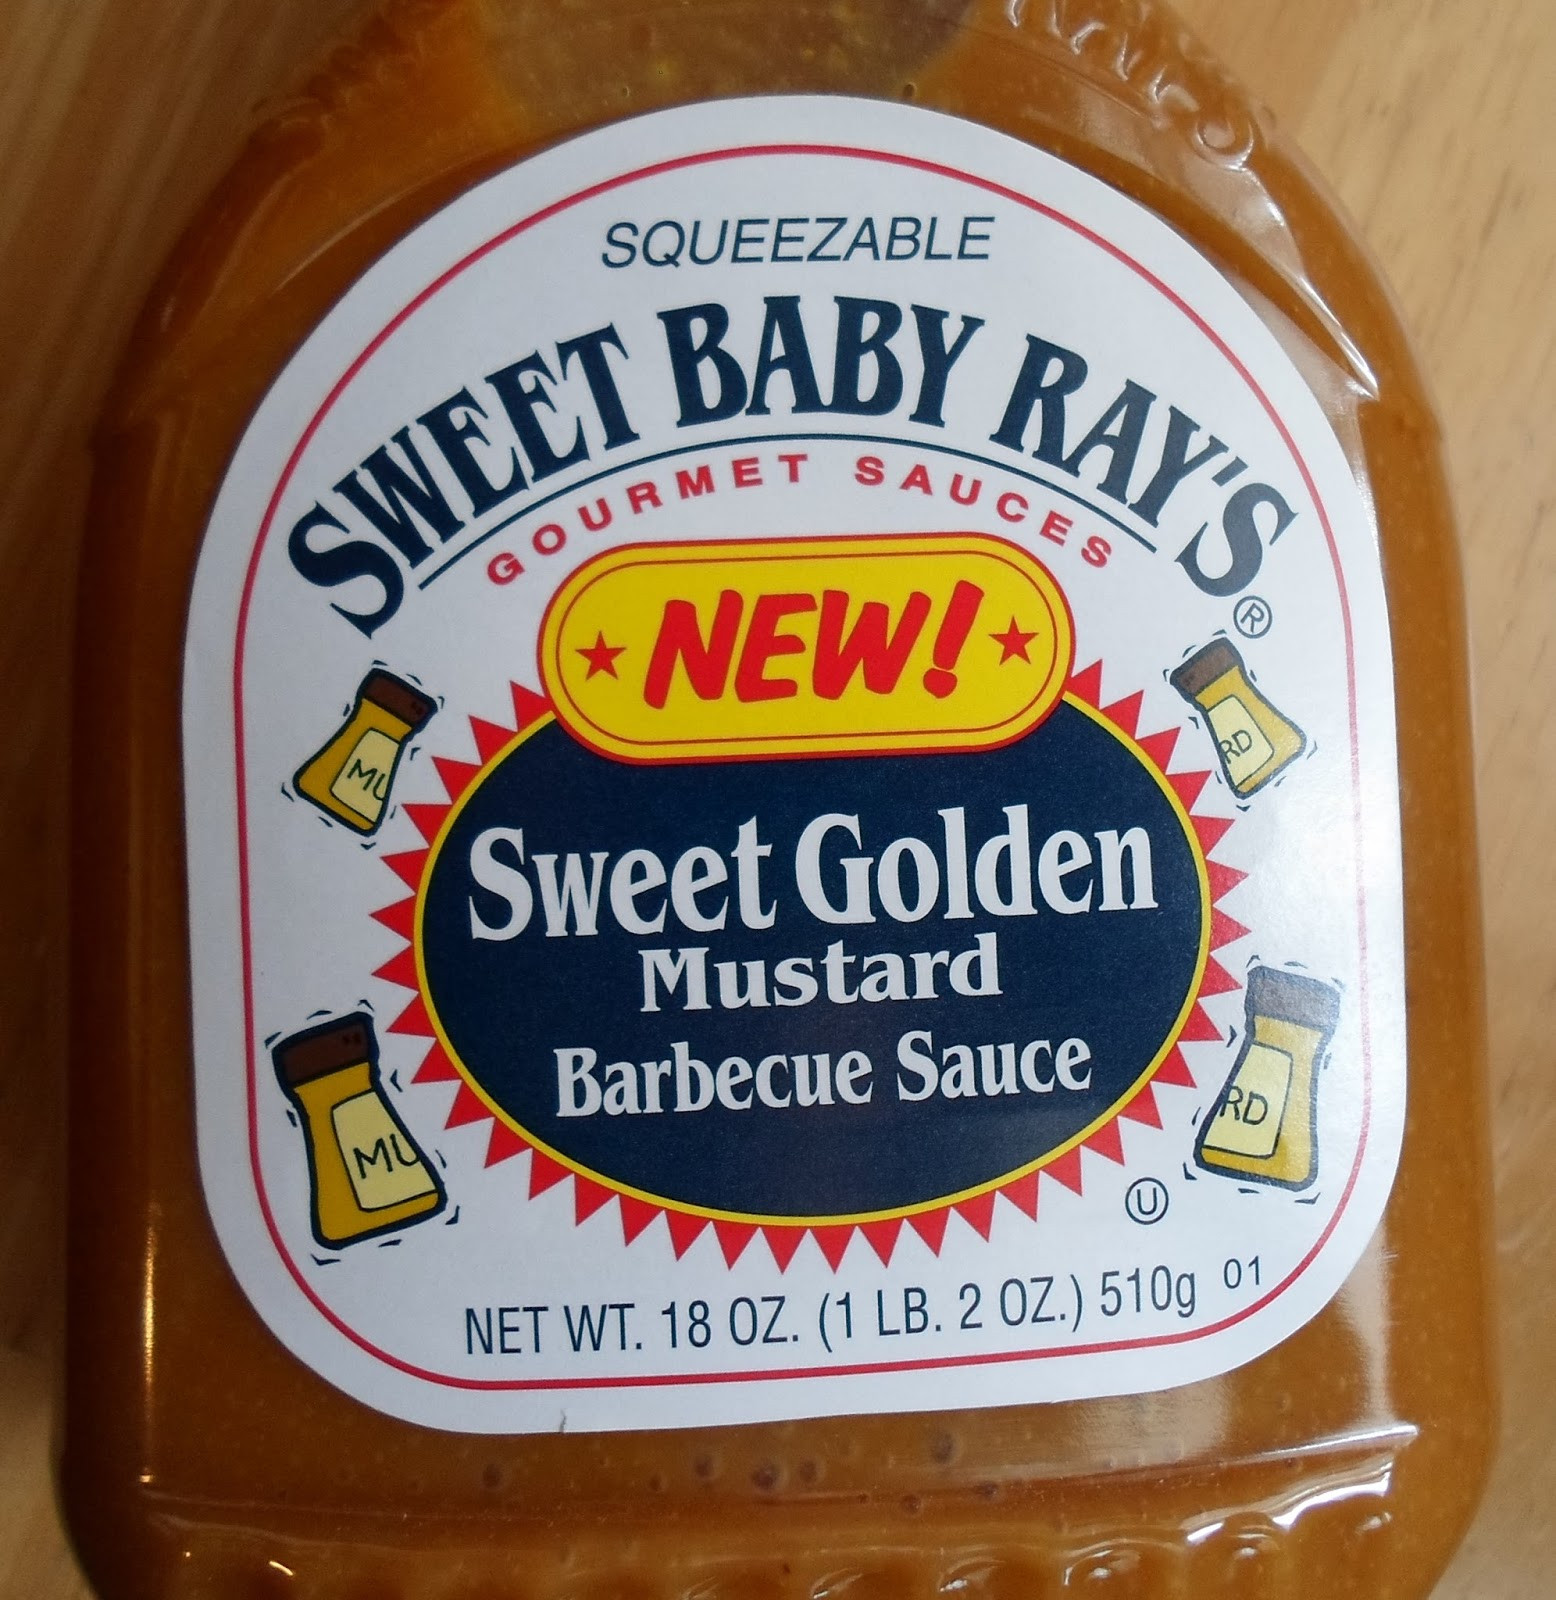 Sweet Baby Ray Bbq Sauce Chicken Recipe
 Happier Than A Pig In Mud Two Ingre nt Sweet Baby Ray s